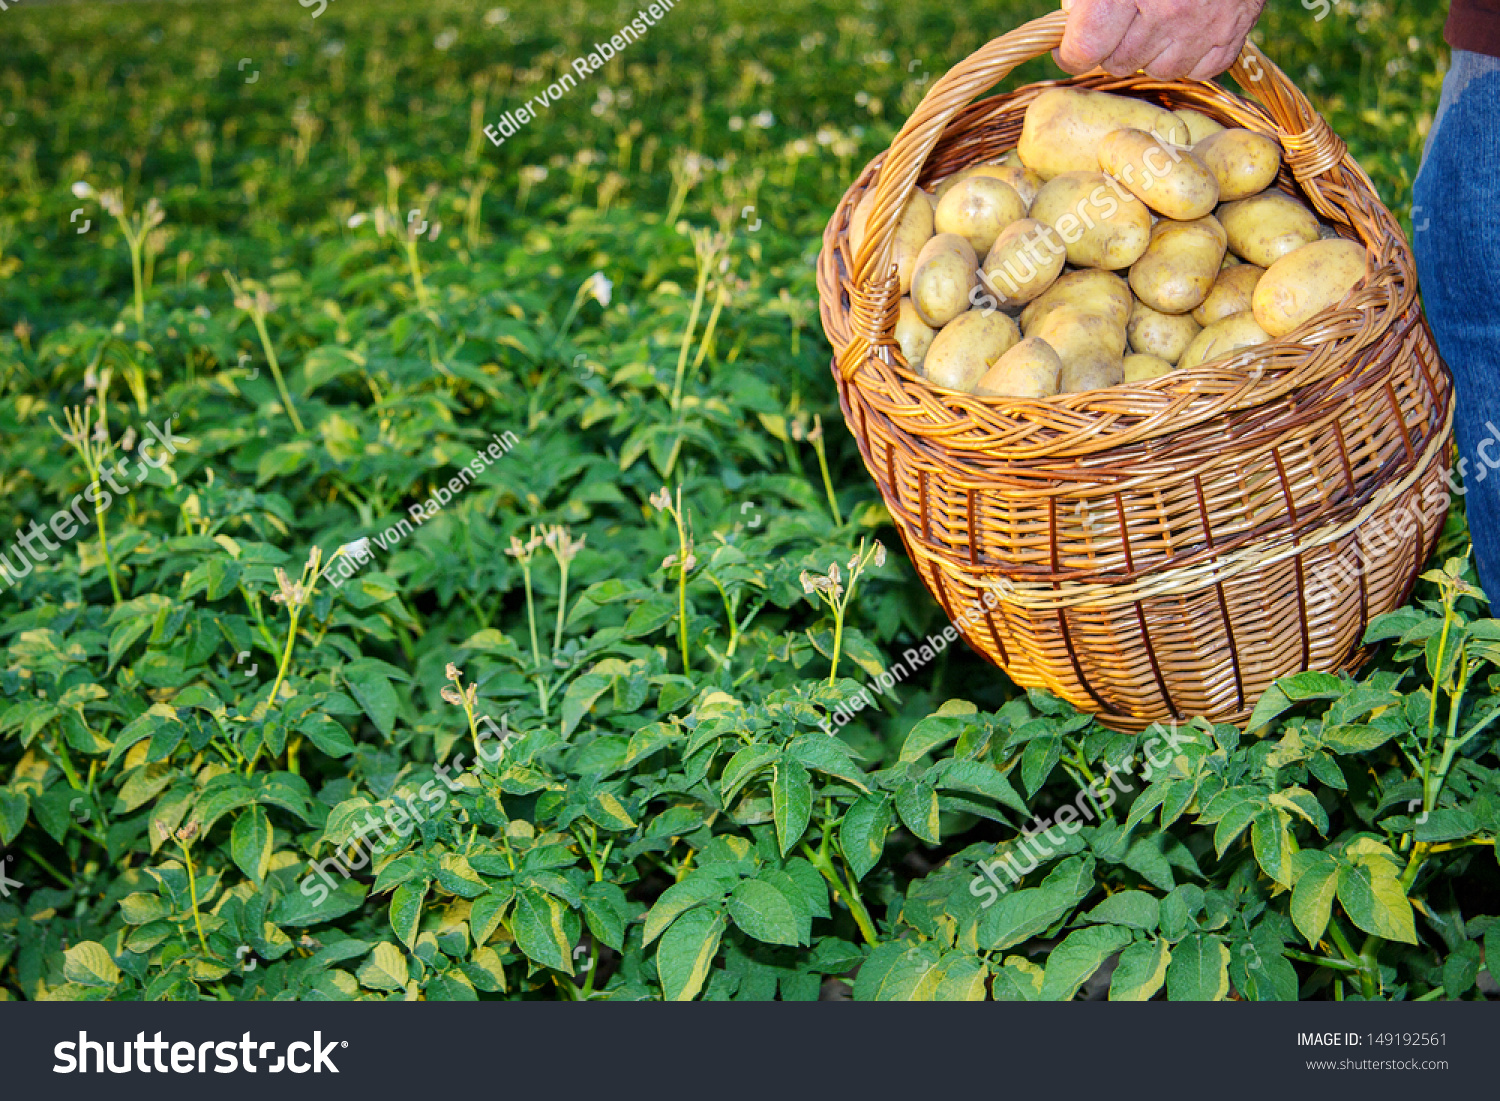 stock-photo-basket-full-of-potatoes-in-a